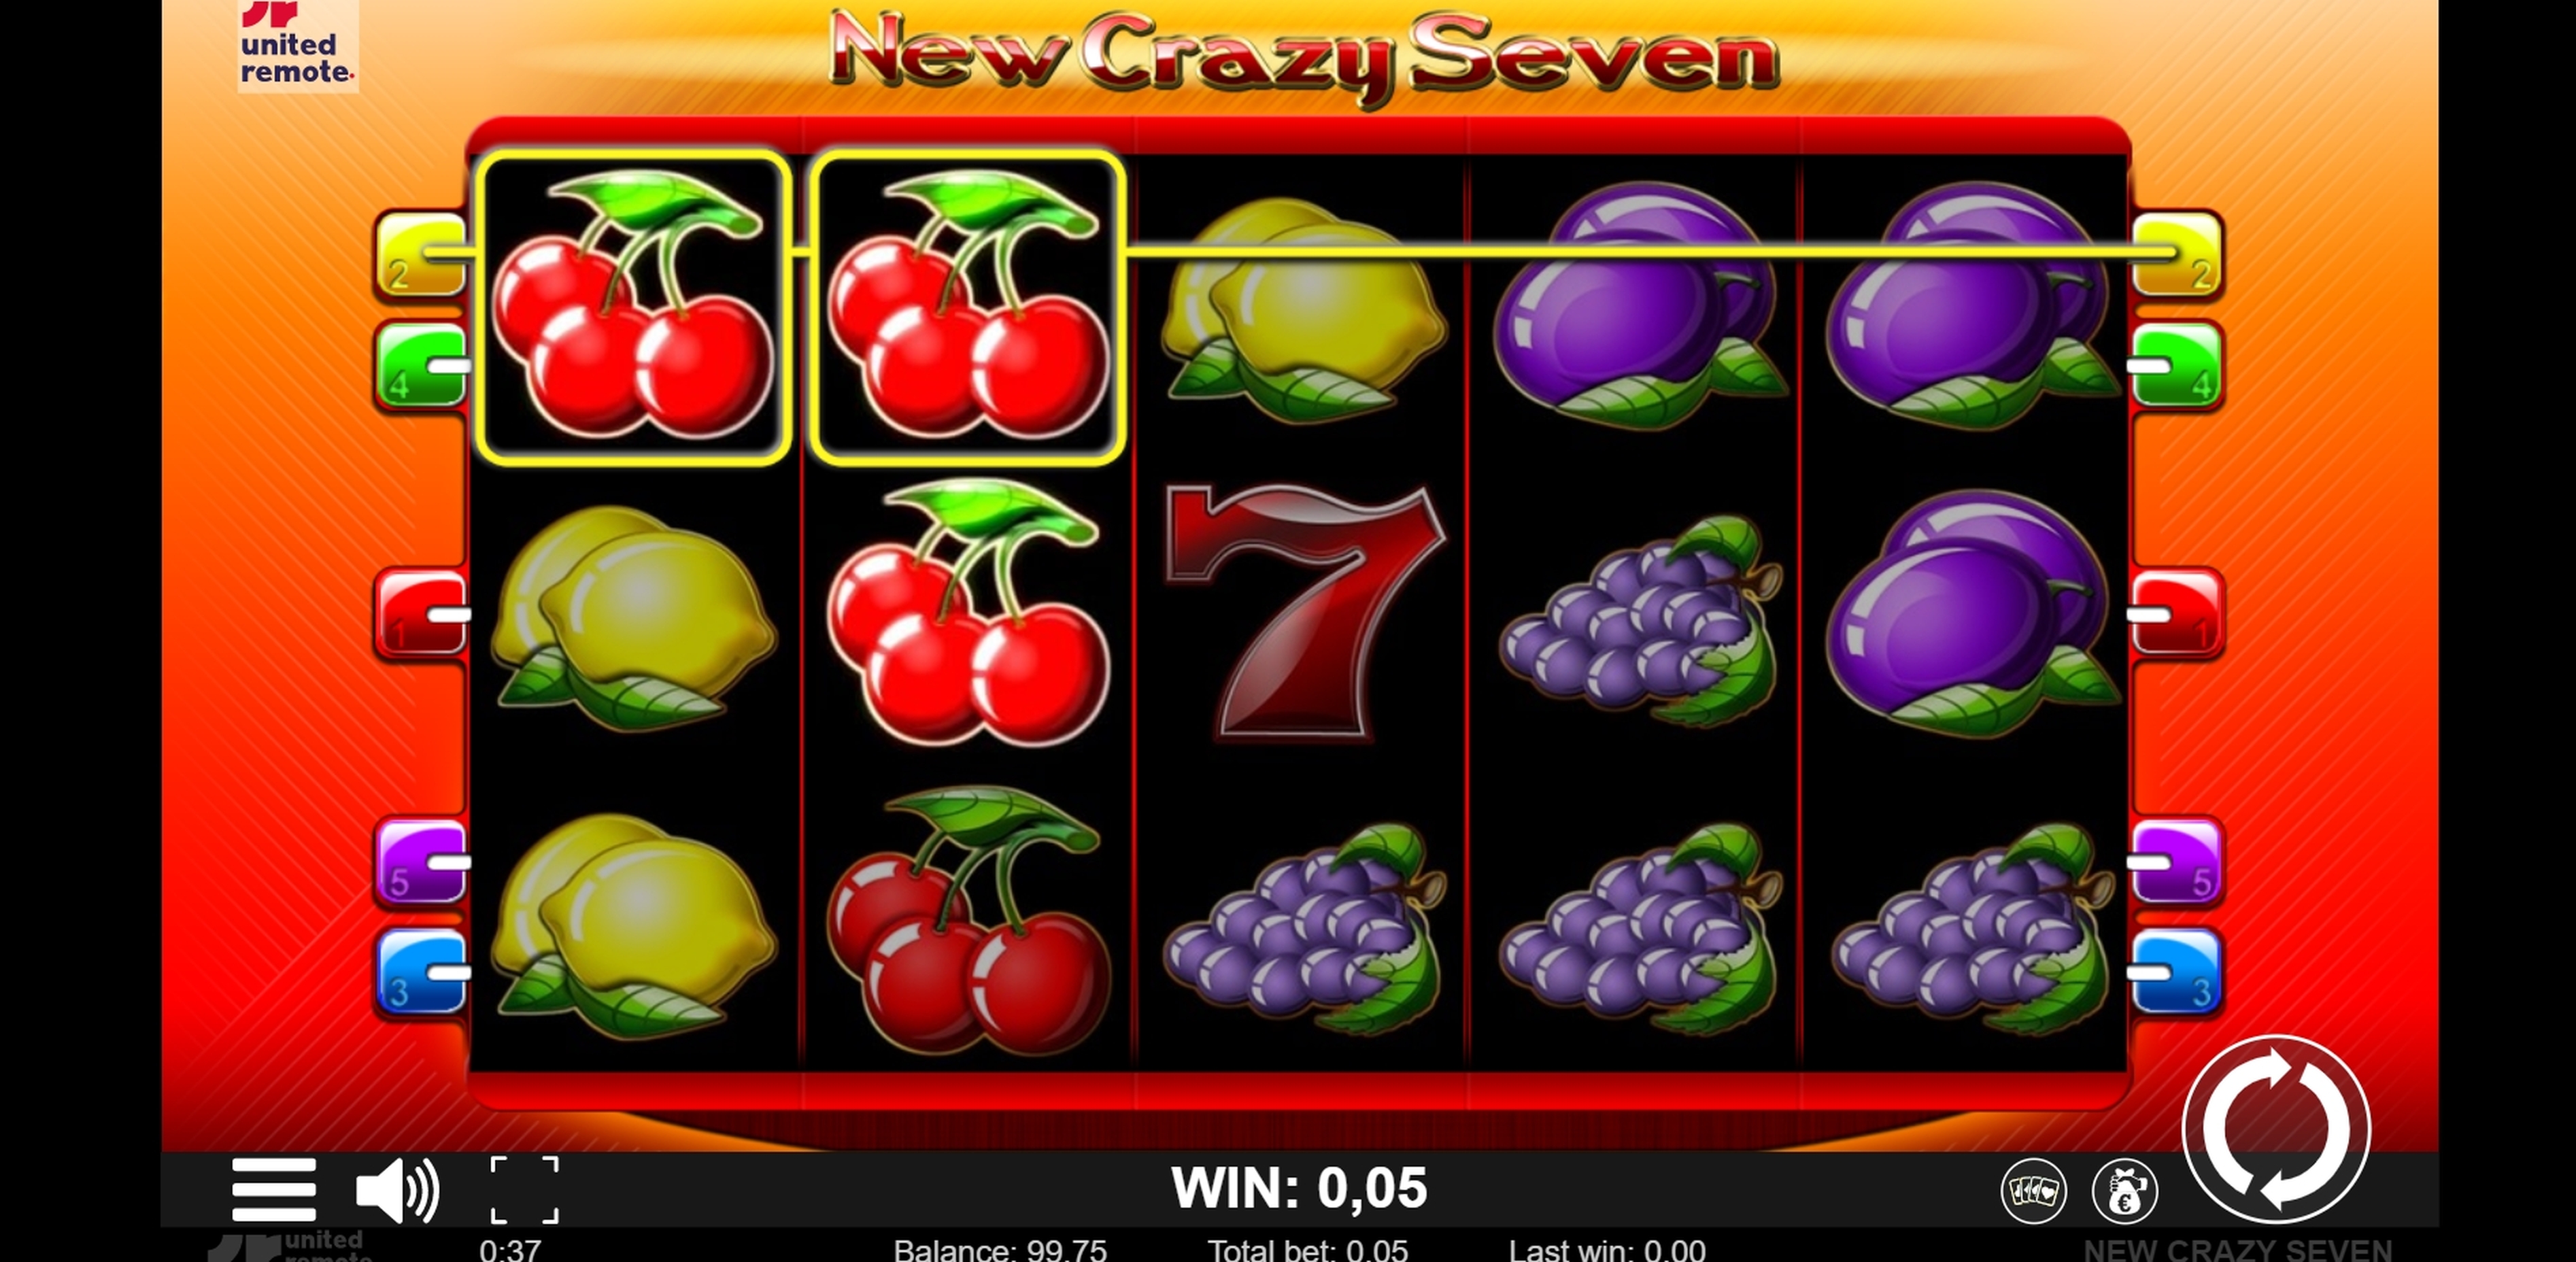 Win Money in New Crazy Seven Free Slot Game by LionLine